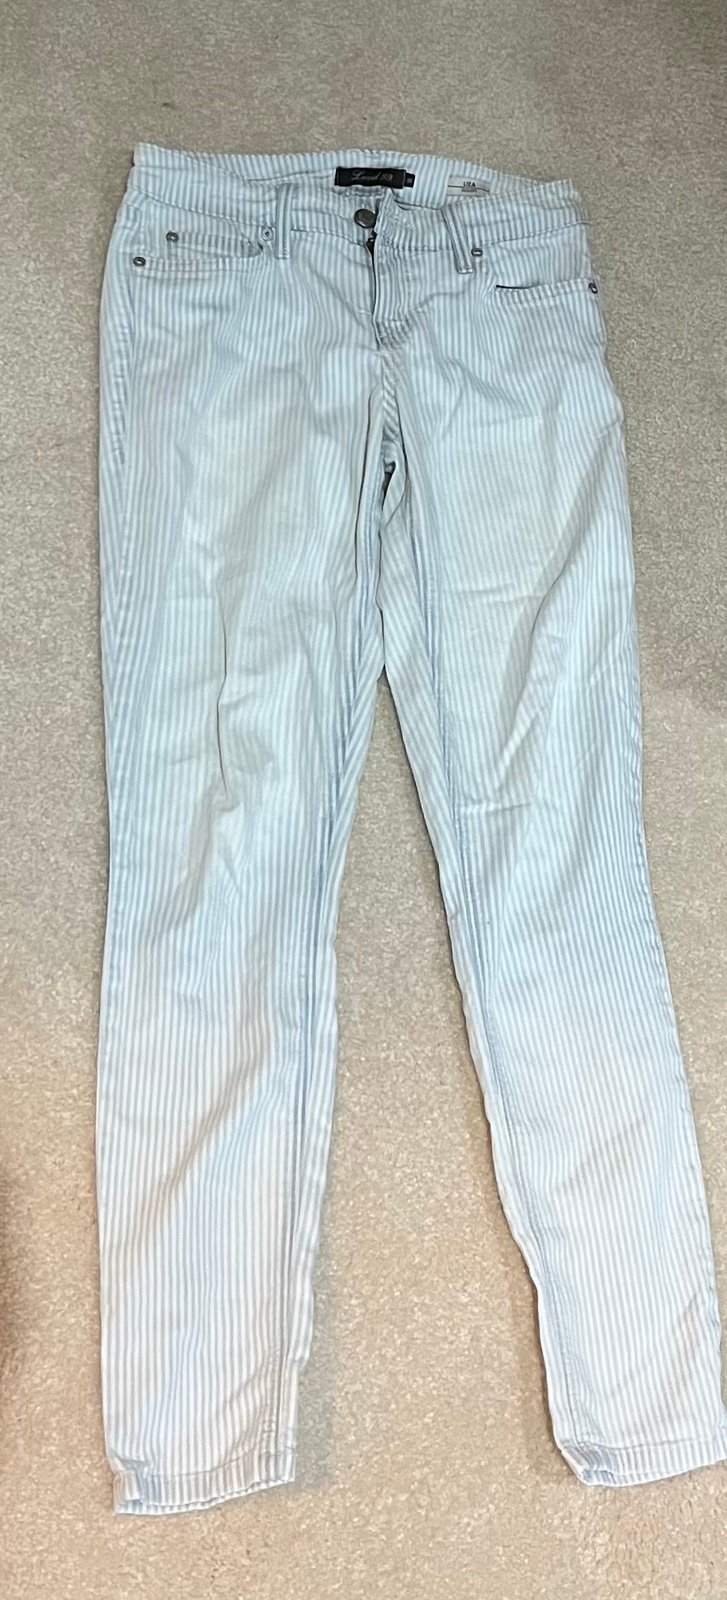 cheapest place to buy  Anthropologie pants MkHeRi16v on